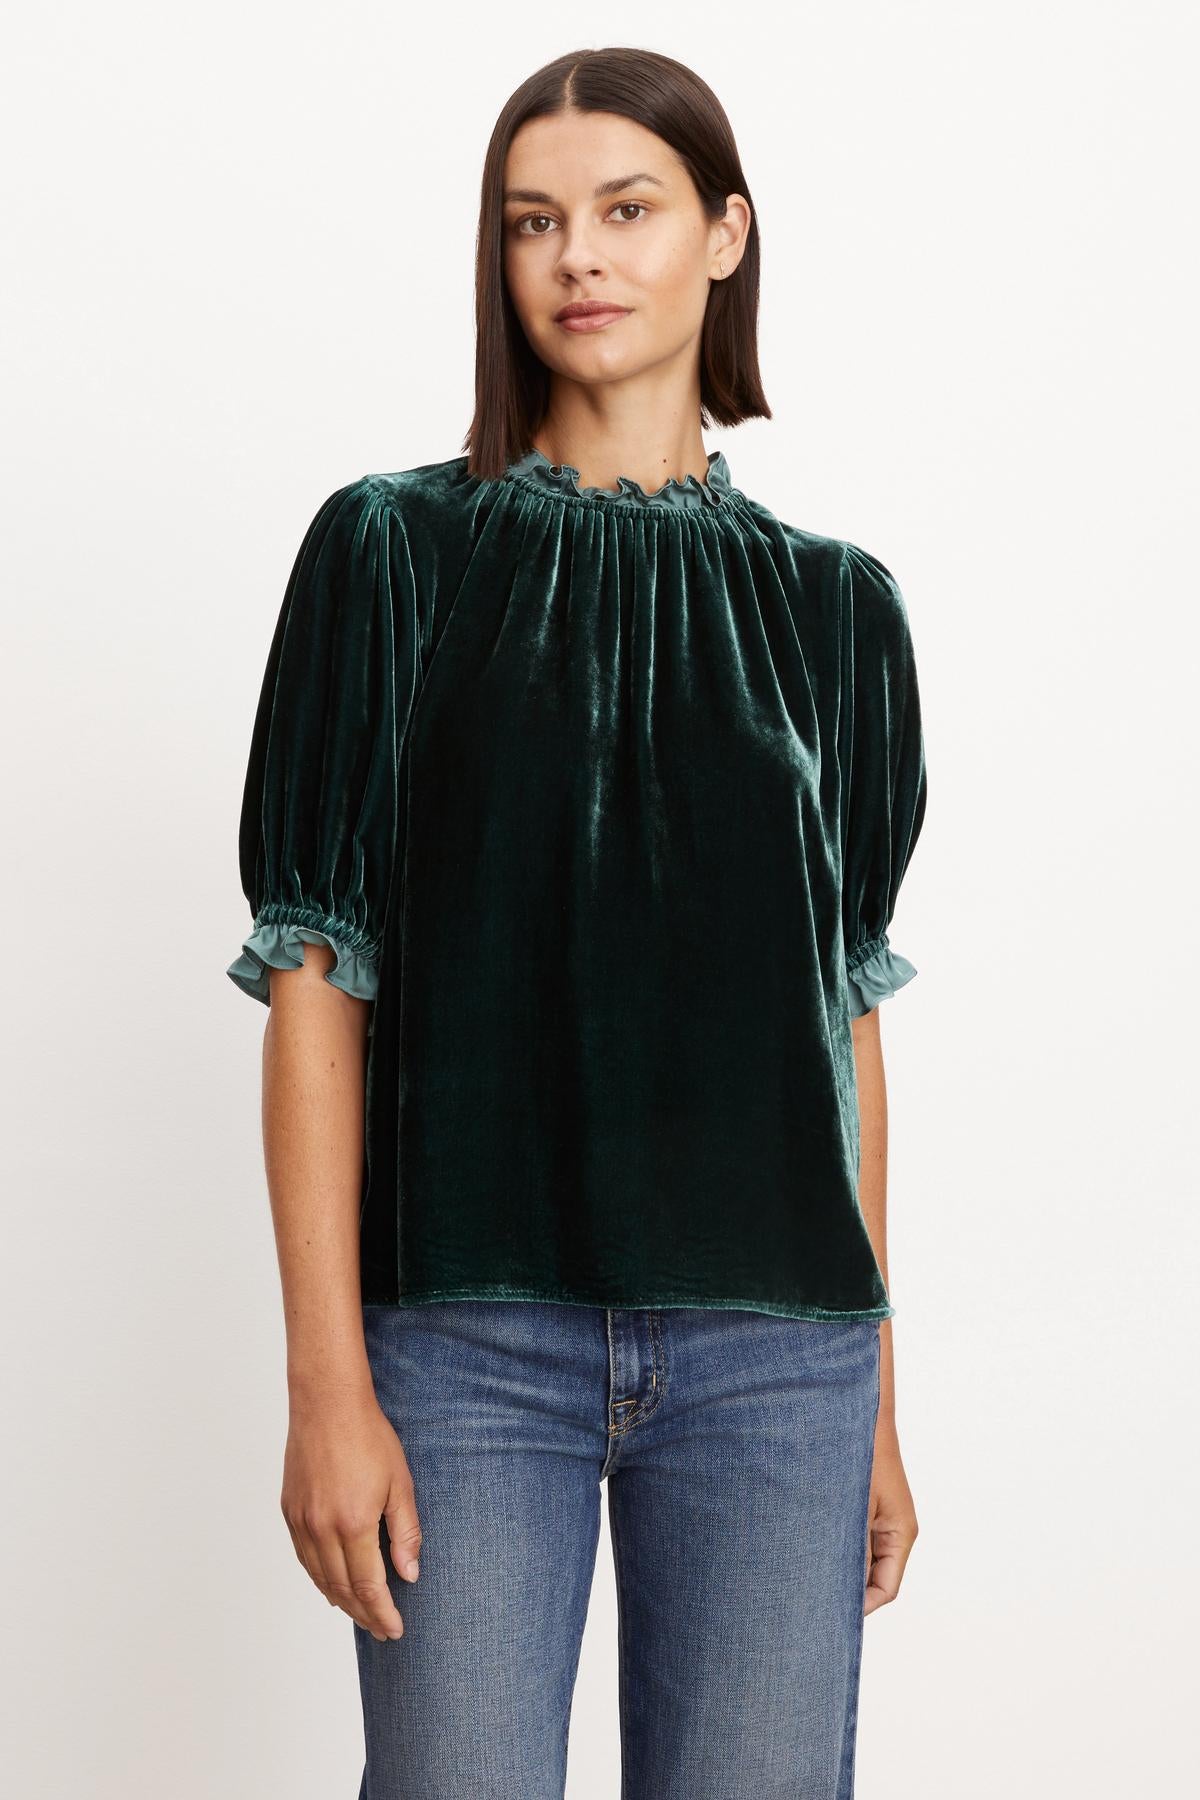 A woman wearing a VAL SILK VELVET TOP by Velvet by Graham & Spencer with elastic ruffle neckline.-35654473154753